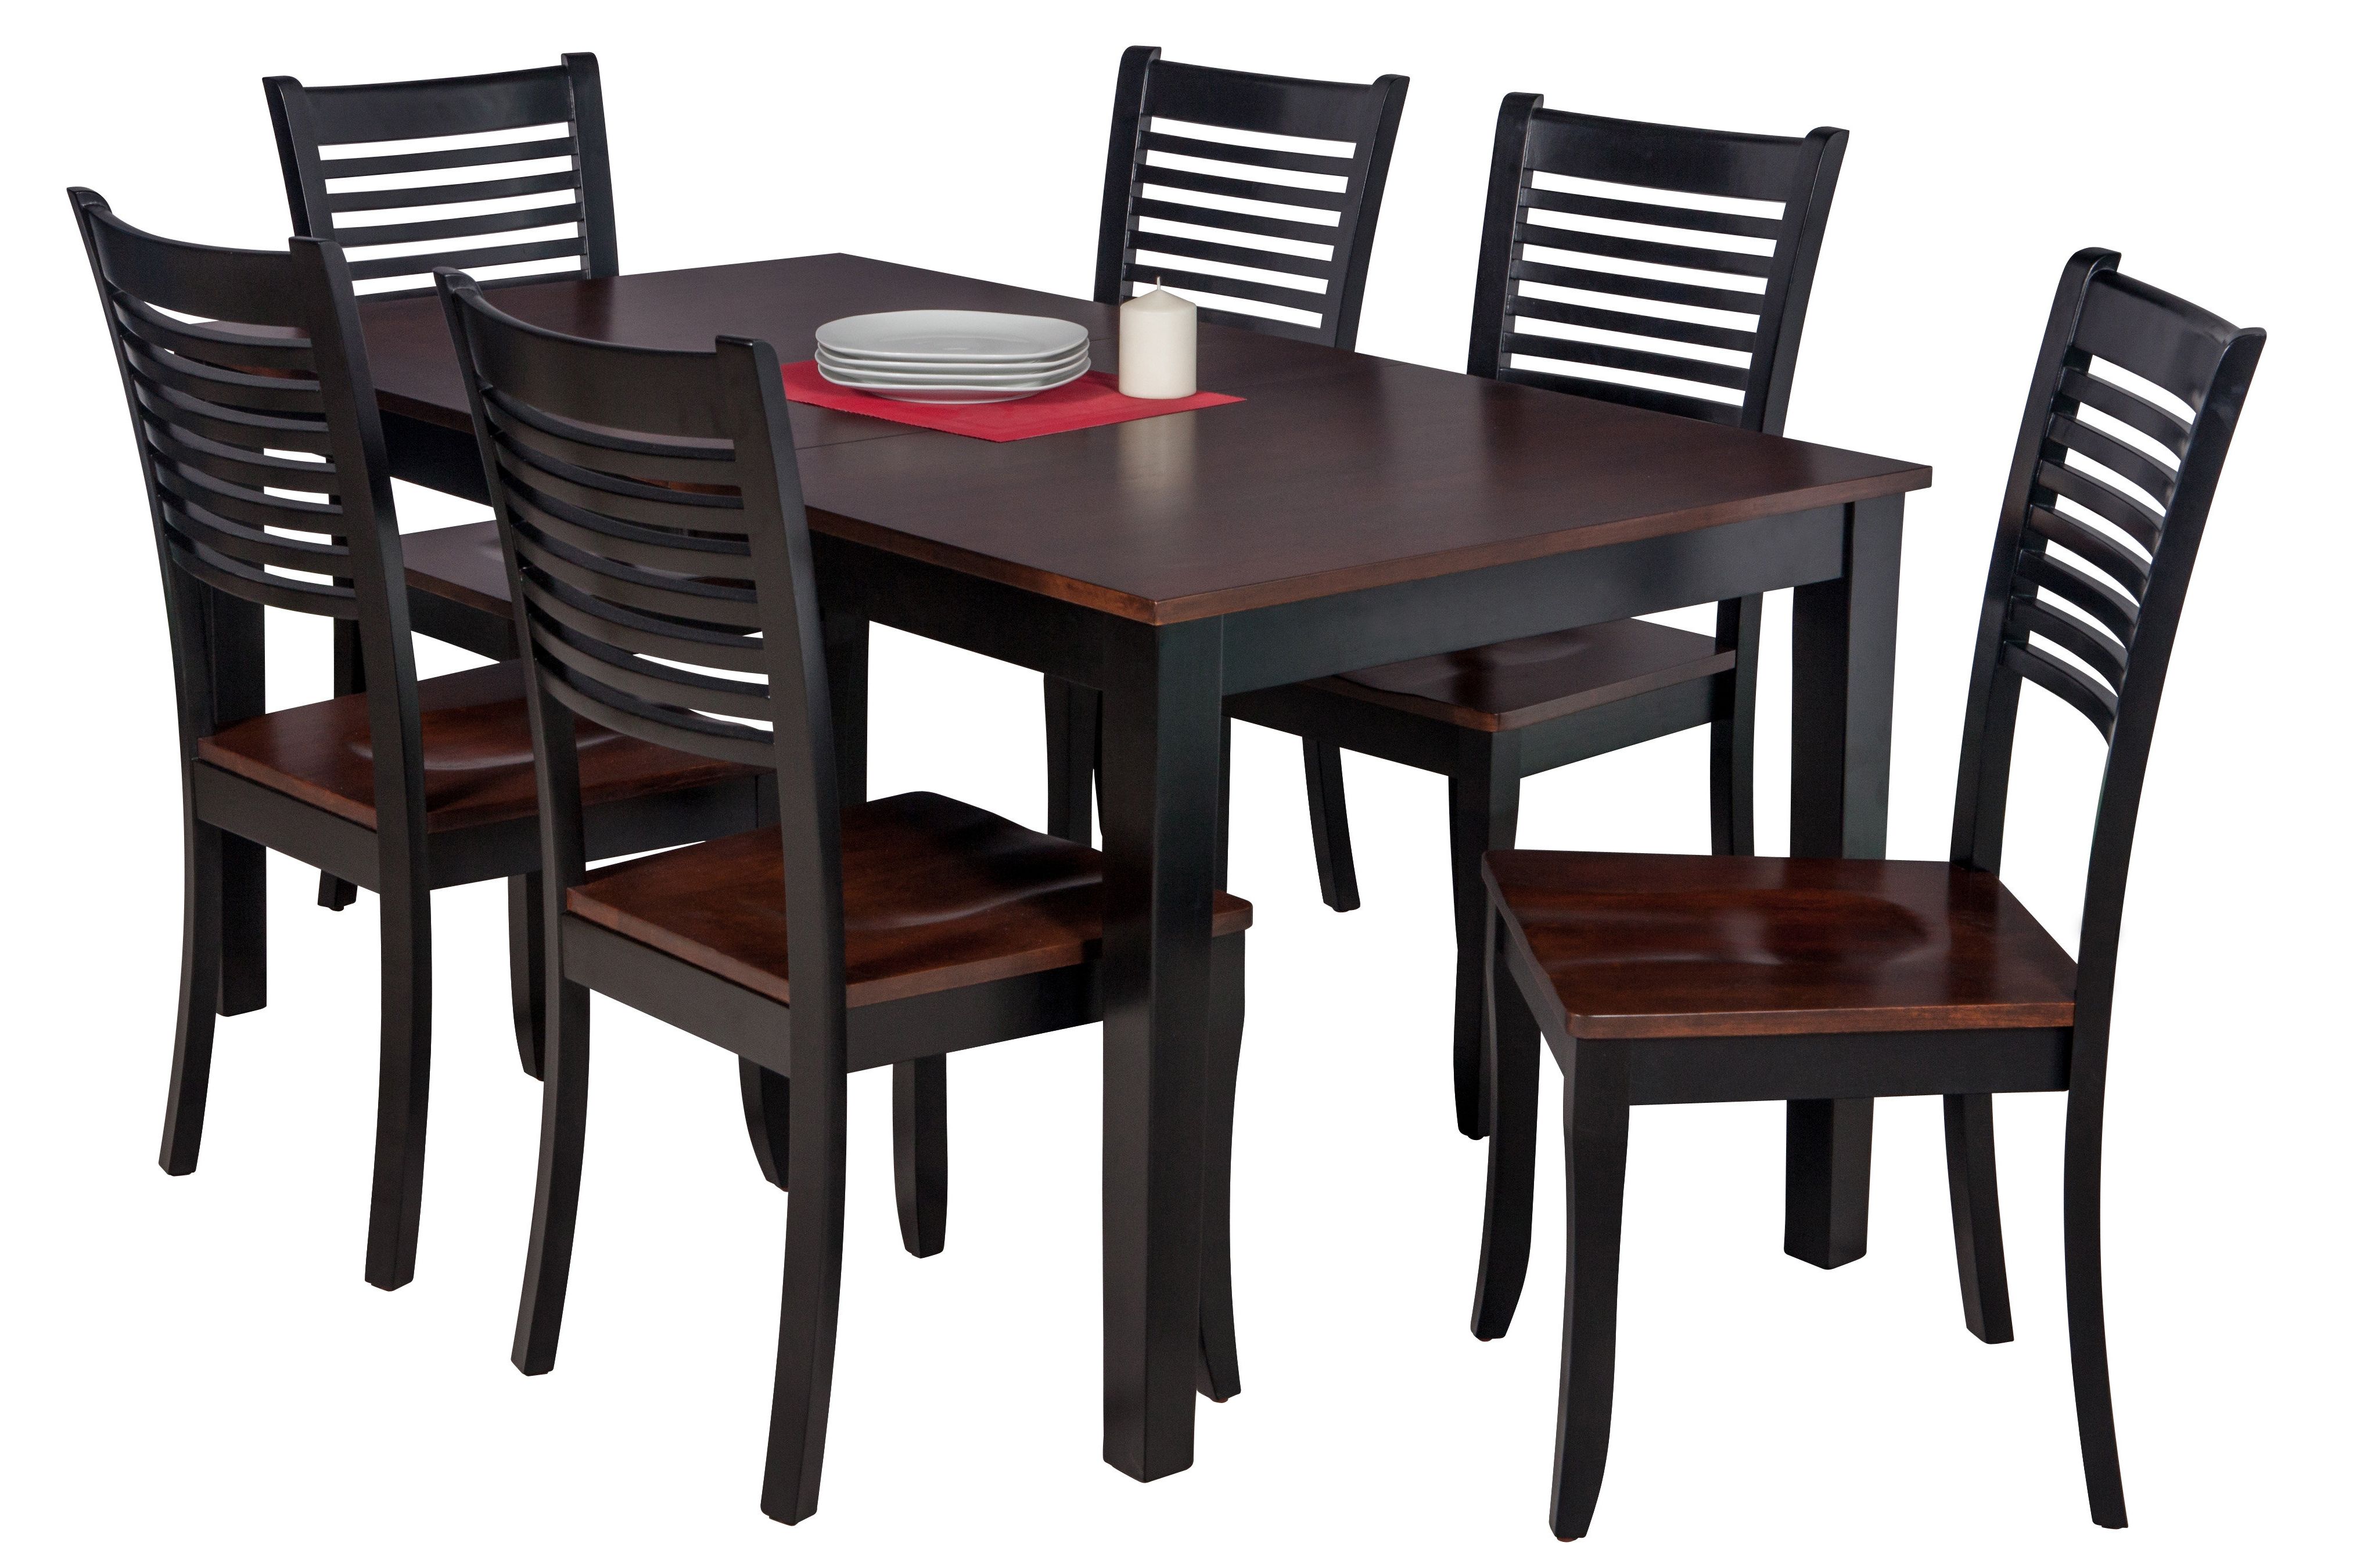 Preferred Loon Peak Downieville Lawson Dumont 7 Piece Solid Wood Dining Set Pertaining To Hanska Wooden 5 Piece Counter Height Dining Table Sets (set Of 5) (View 16 of 25)